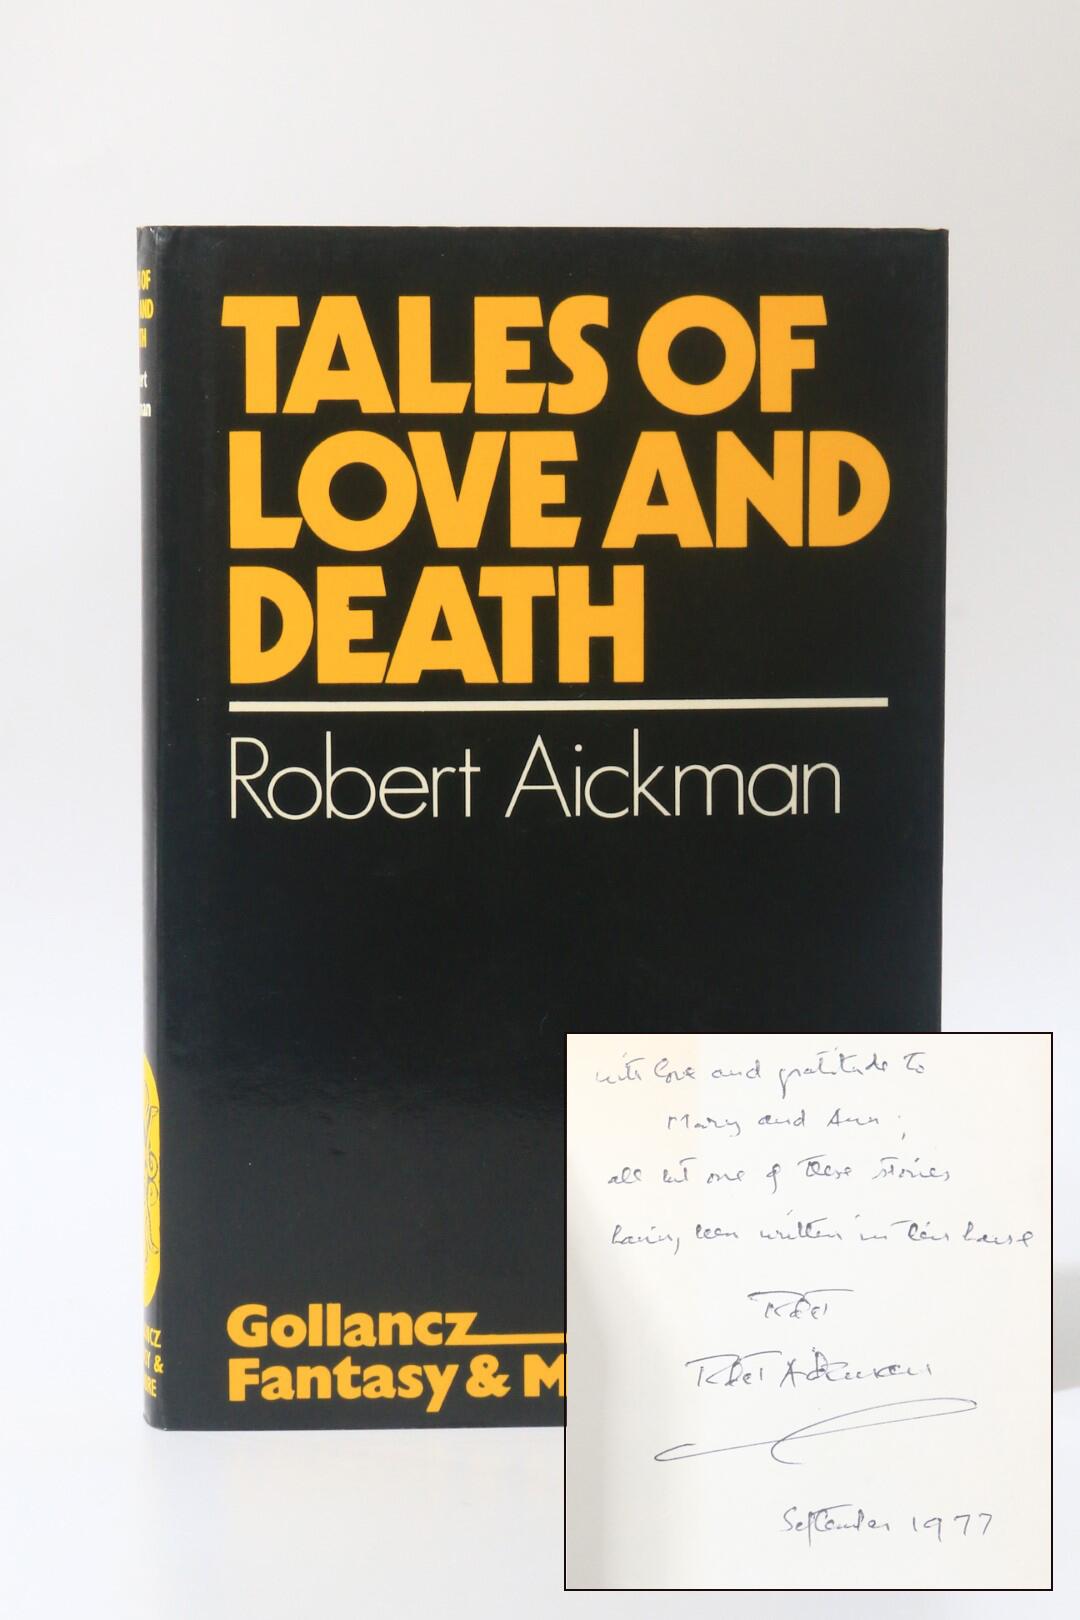 Robert Aickman - Tales of Love and Death - Gollancz, 1977, Signed First Edition.